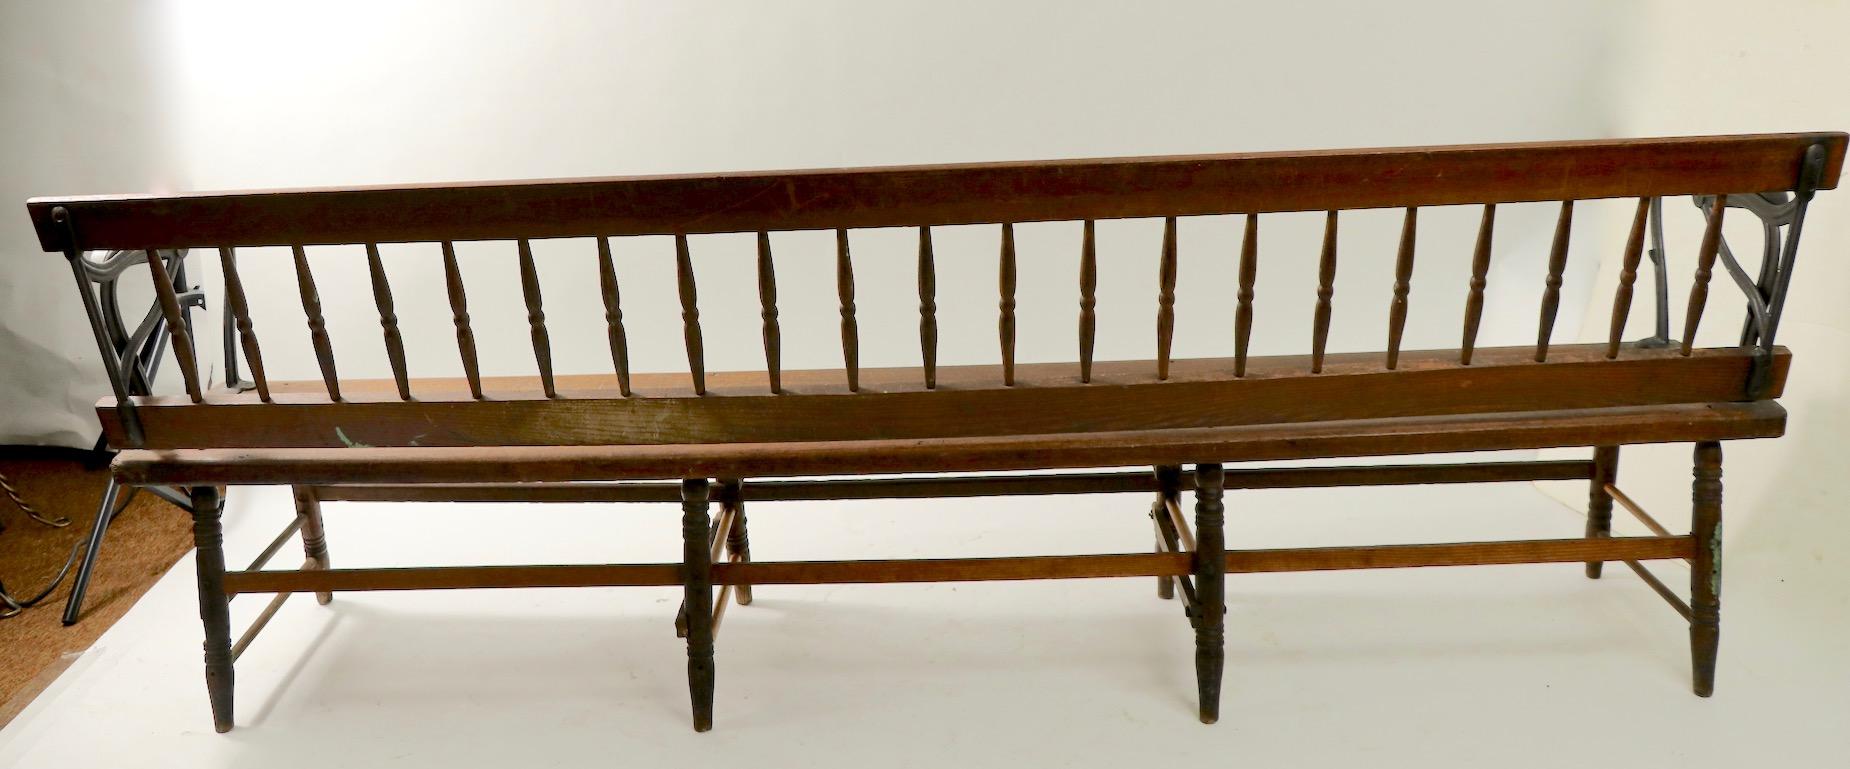  Industrial Victorian Reversible Train Station Bench 2